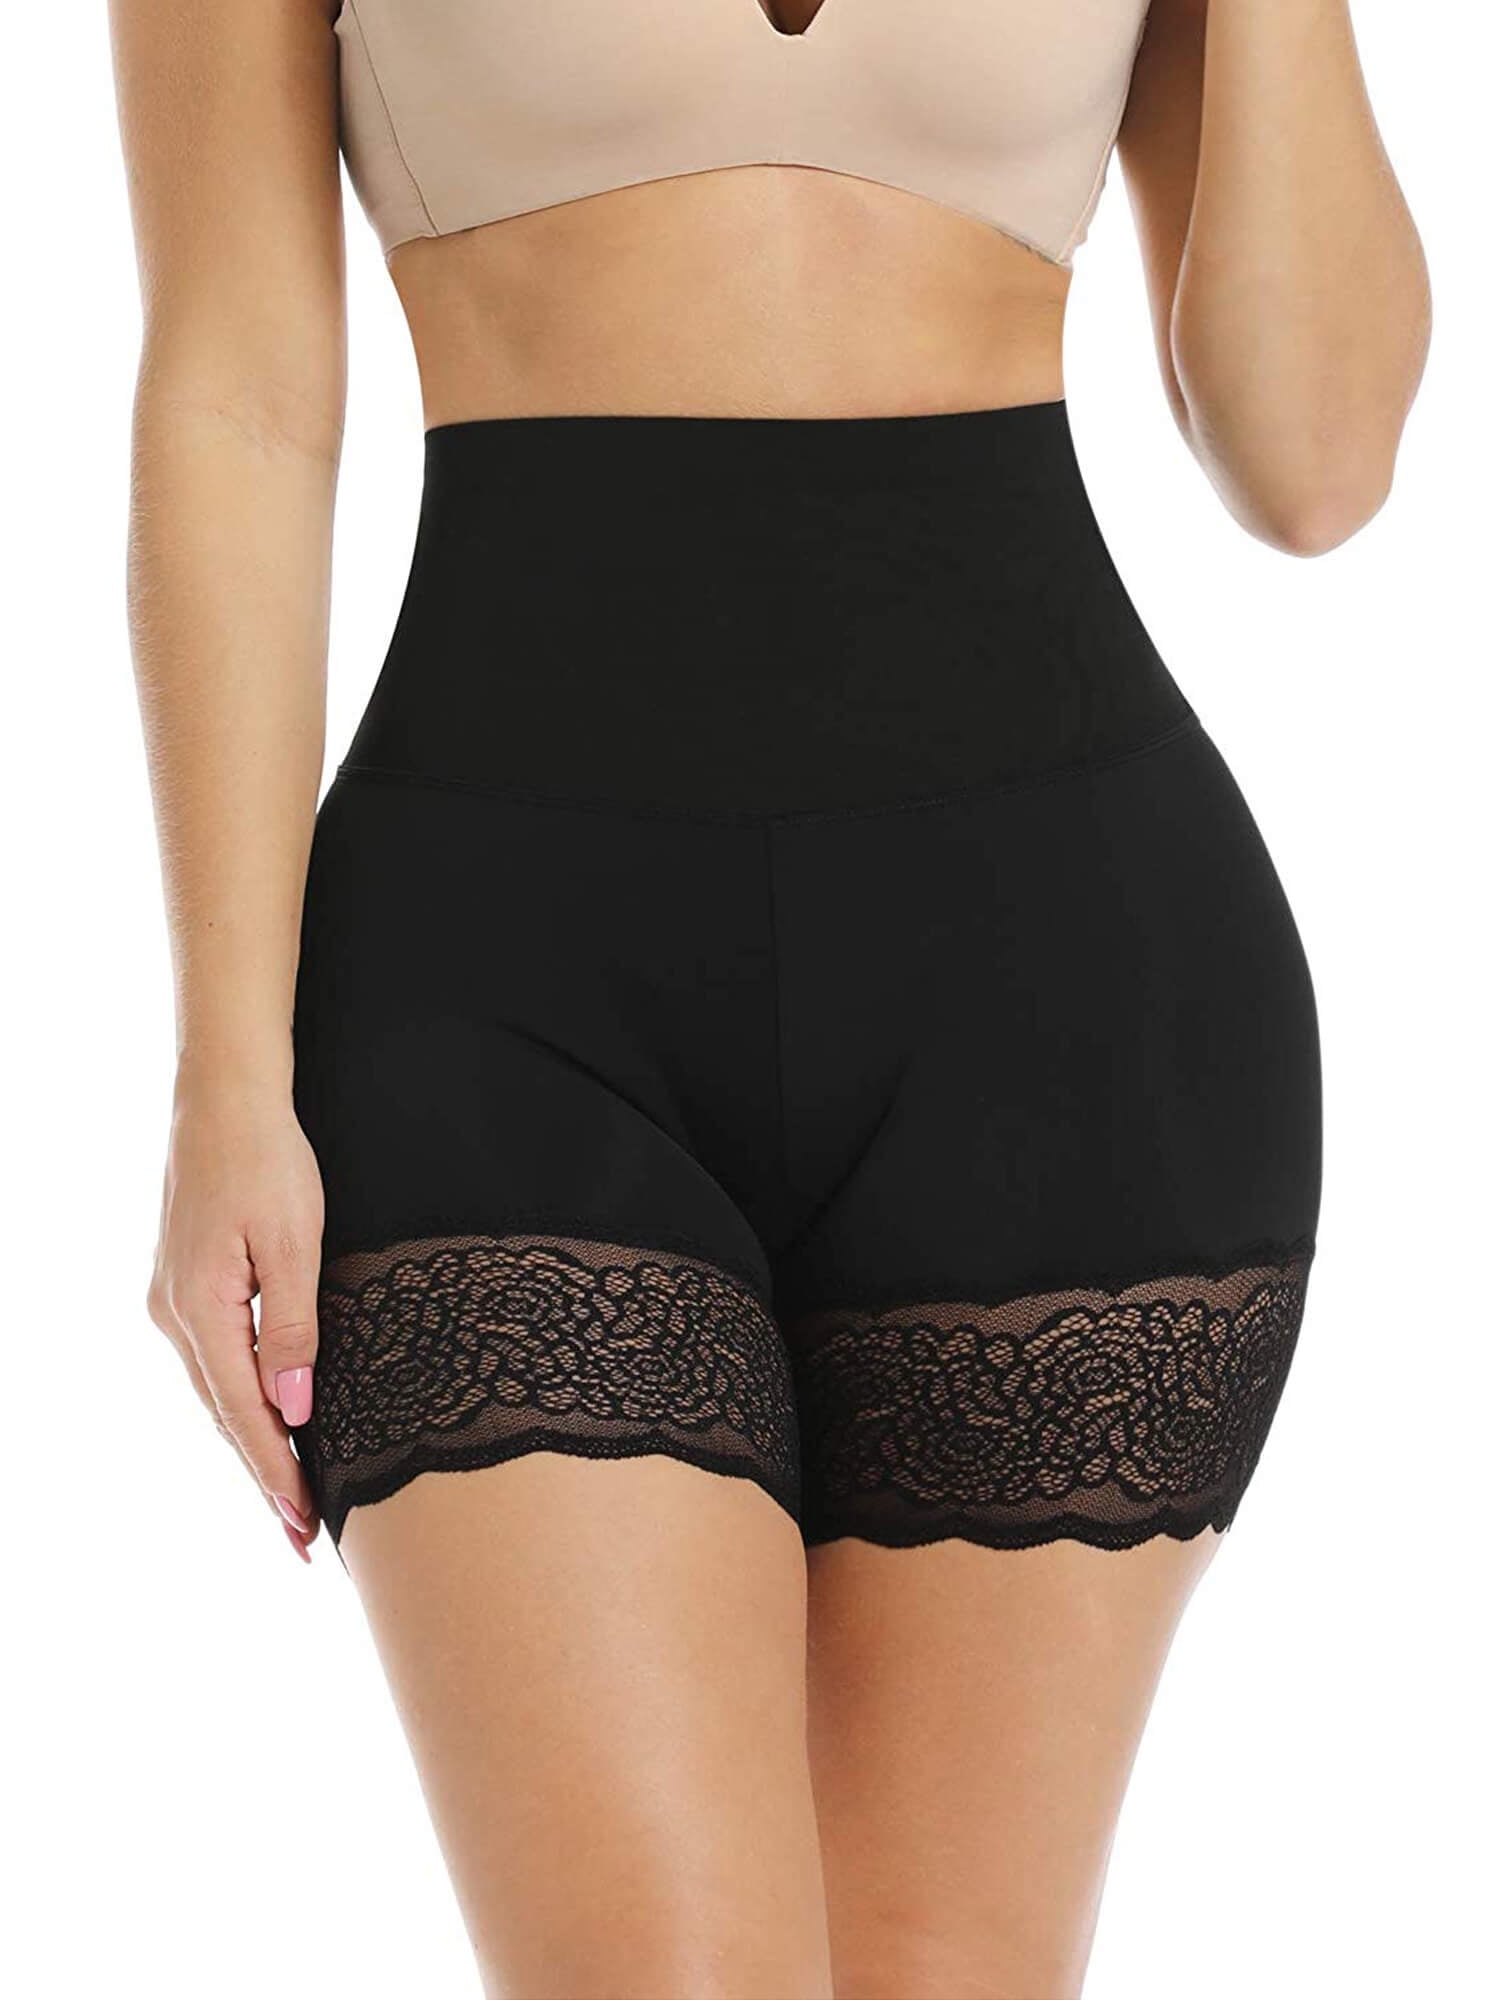 MURTIAL Slip Shorts for Under Dresses Women Elastic Thigh Slimmer Underwear Lace Panty Tummy Control Panties M-XXL